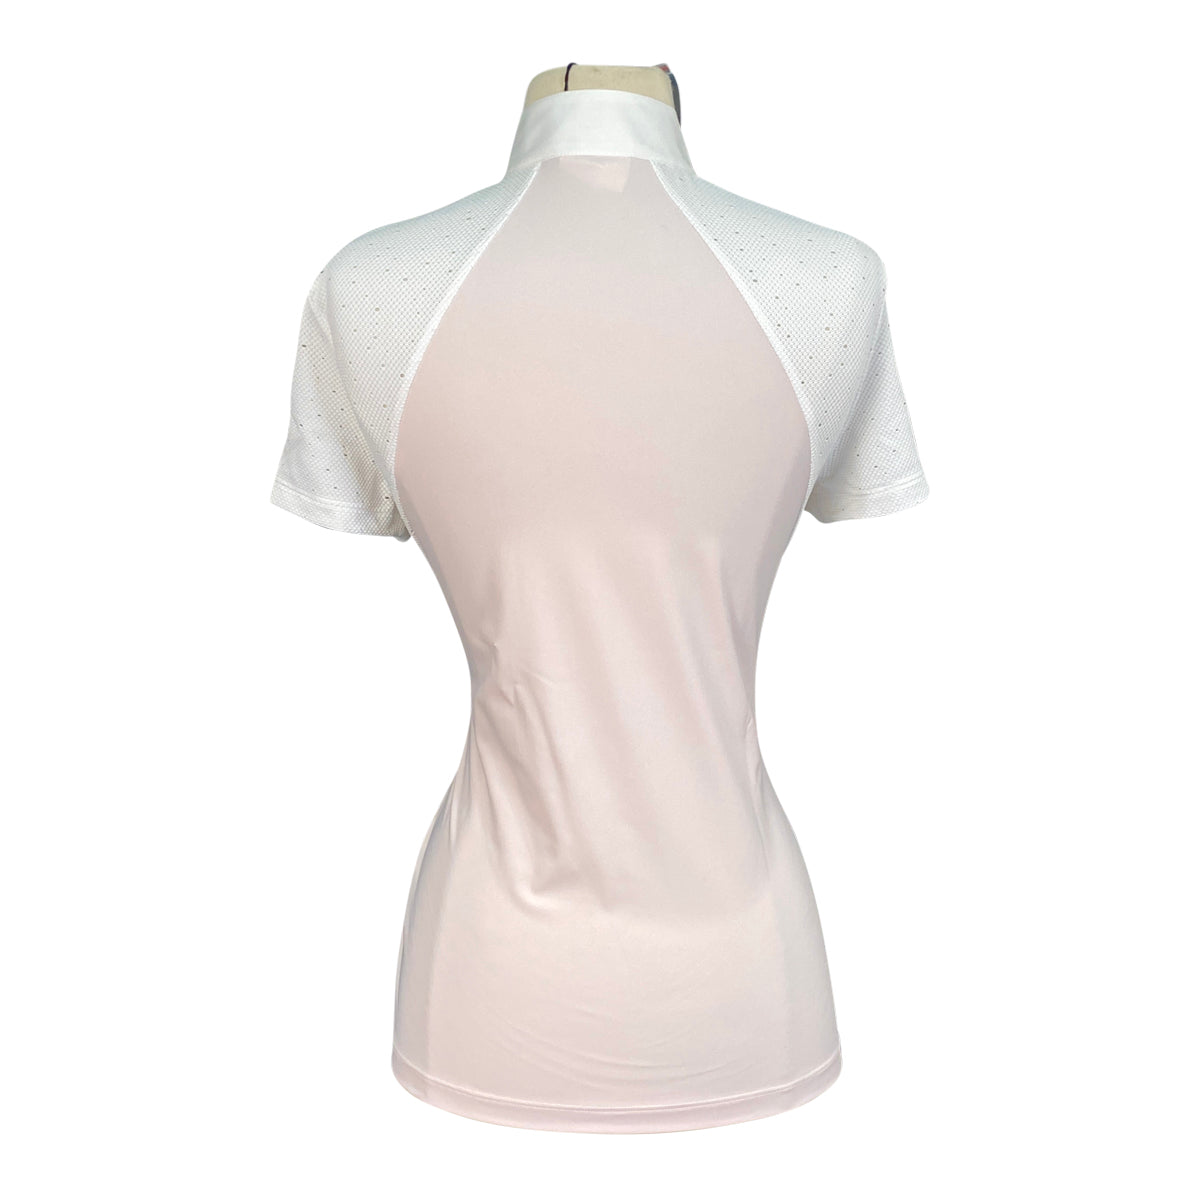 Cavalleria Toscana Crochet S/S Competition Shirt in Pink/White